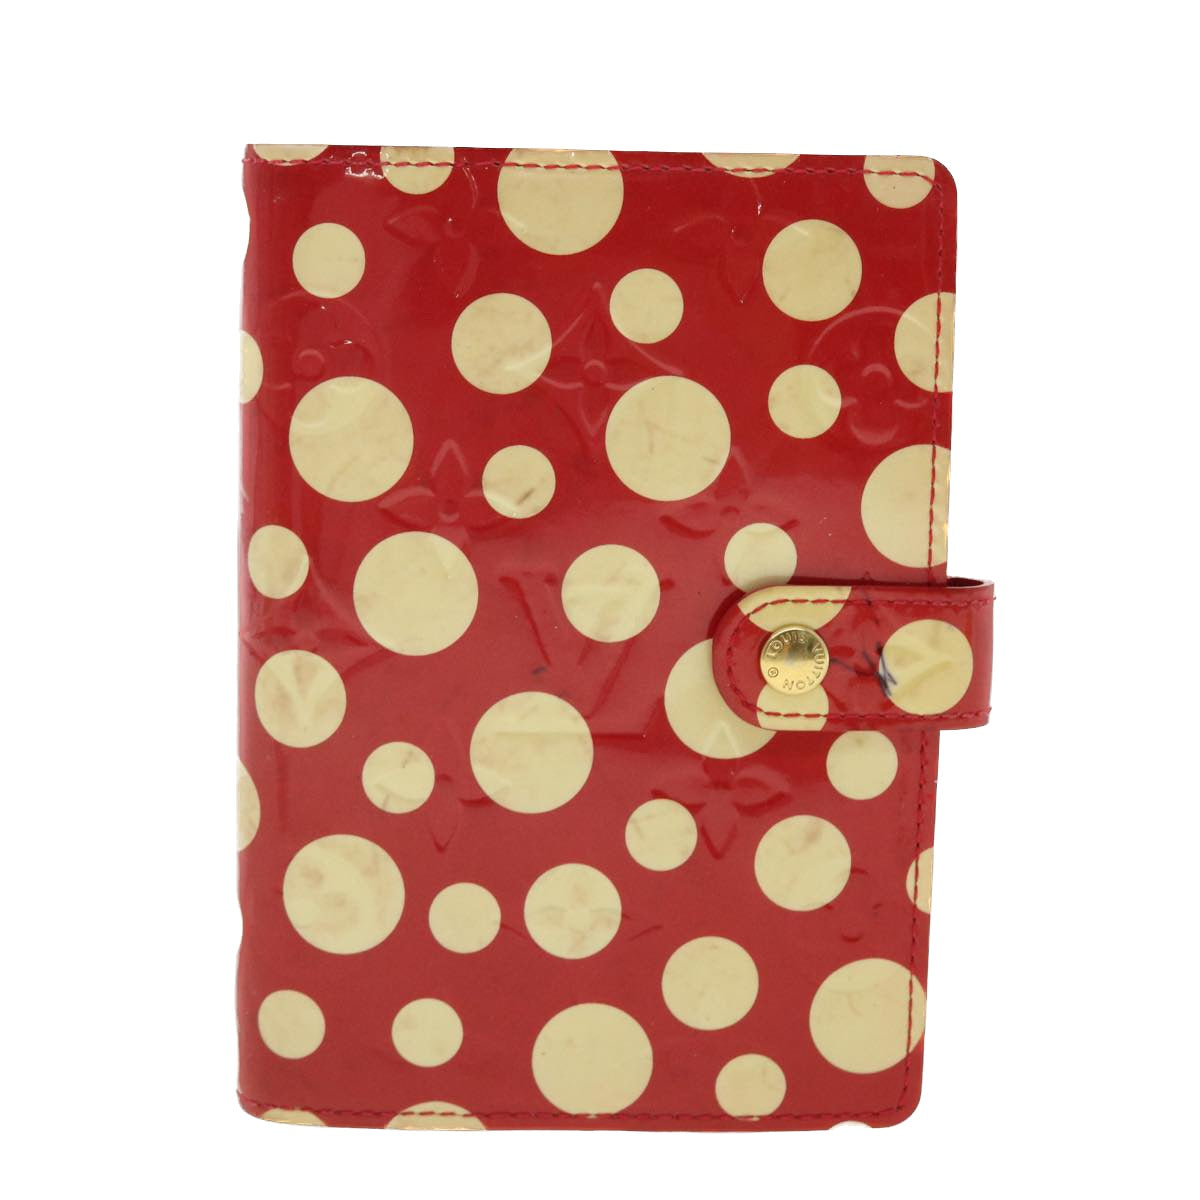 LOUIS VUITTON Vernis Yayoi Kusama Agenda PM Day Planner Cover M91518 Auth 40465